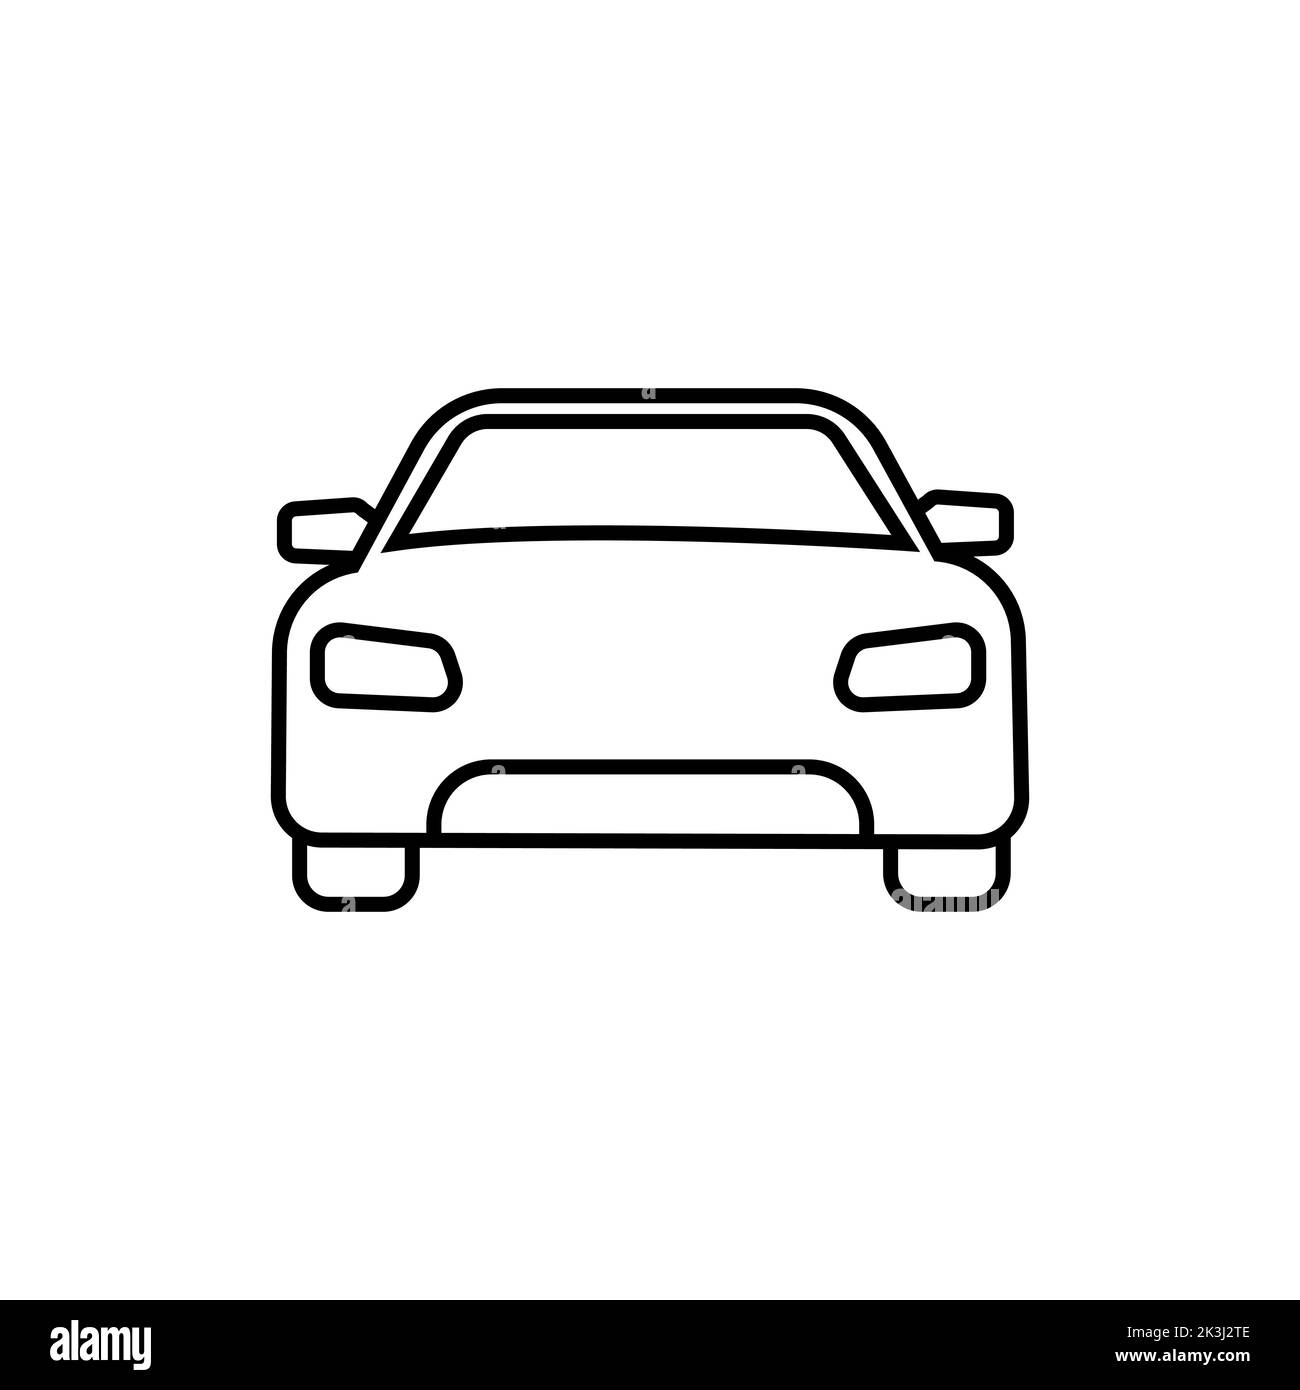 Passenger car line icon. Automobile, traffic, road. Transport concept. Vector illustration can be used for topics like transportation, travel, vehicle Stock Vector